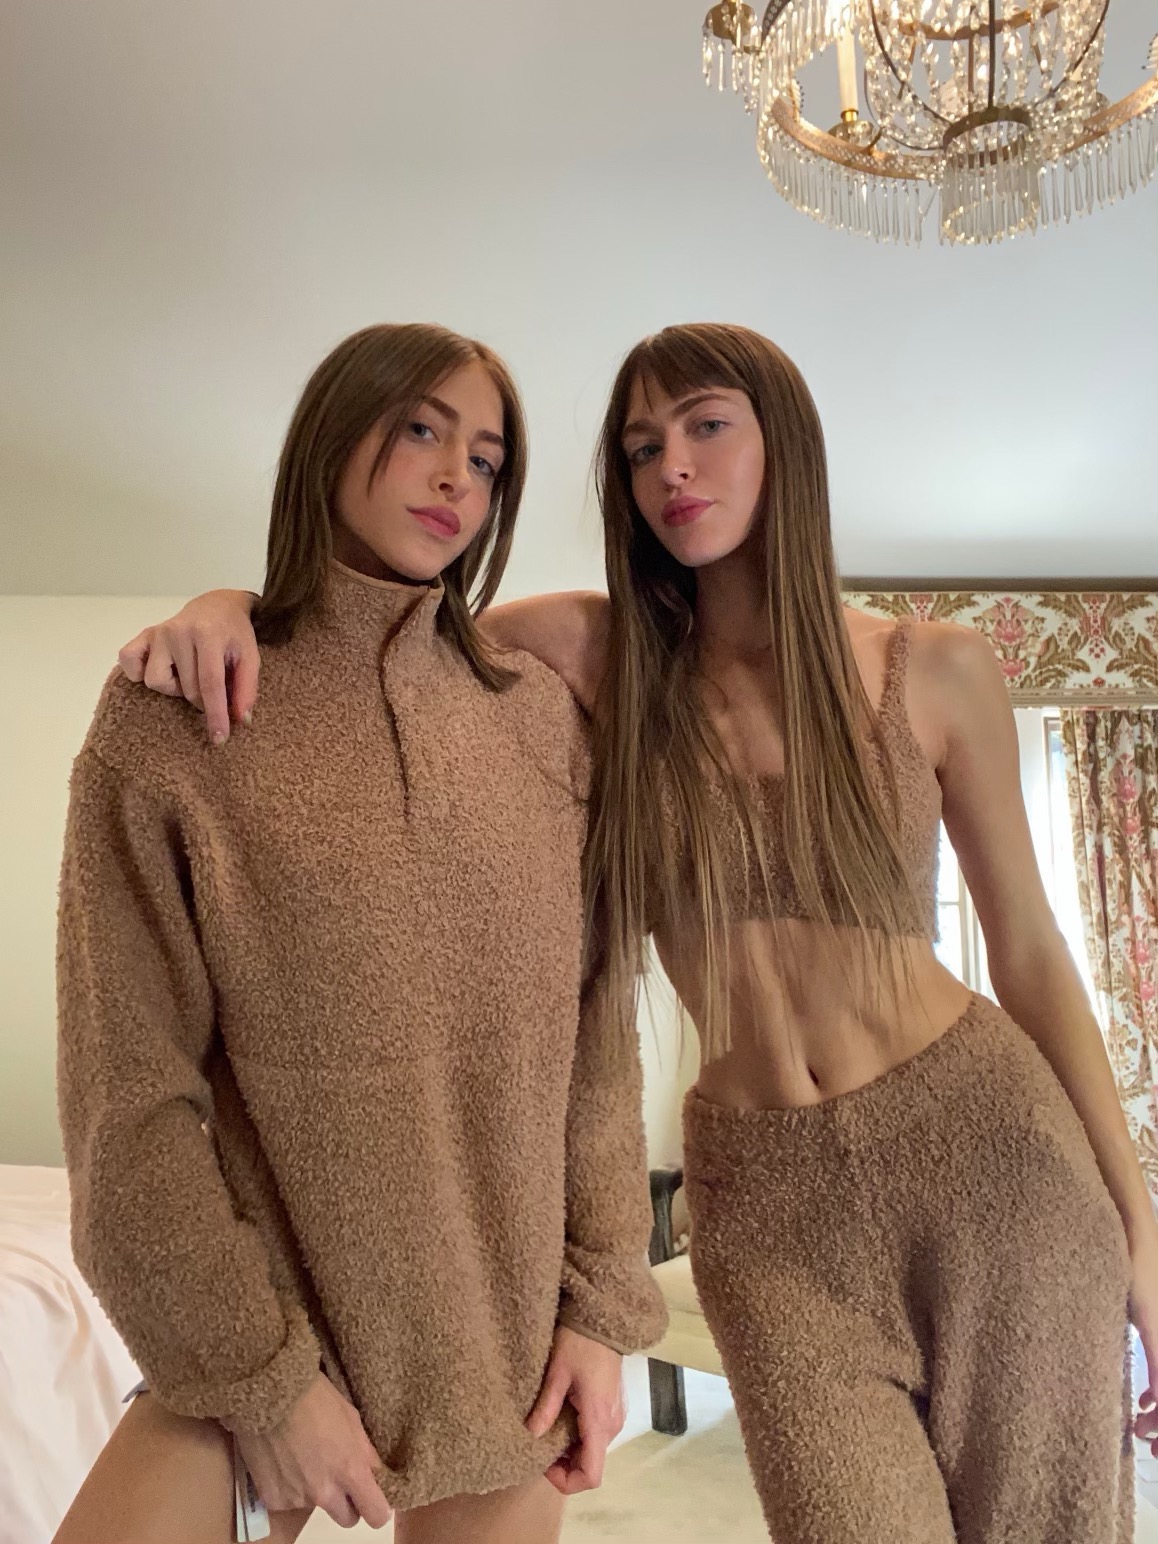 SKIMS on X: Simi and Haze wear SKIMS new Cozy Knit Pullover, Cozy Knit  Bralette, and Cozy Knit Pant in Camel, launching TOMORROW, Thursday  November 19 at 12PM ET. Join the waitlist